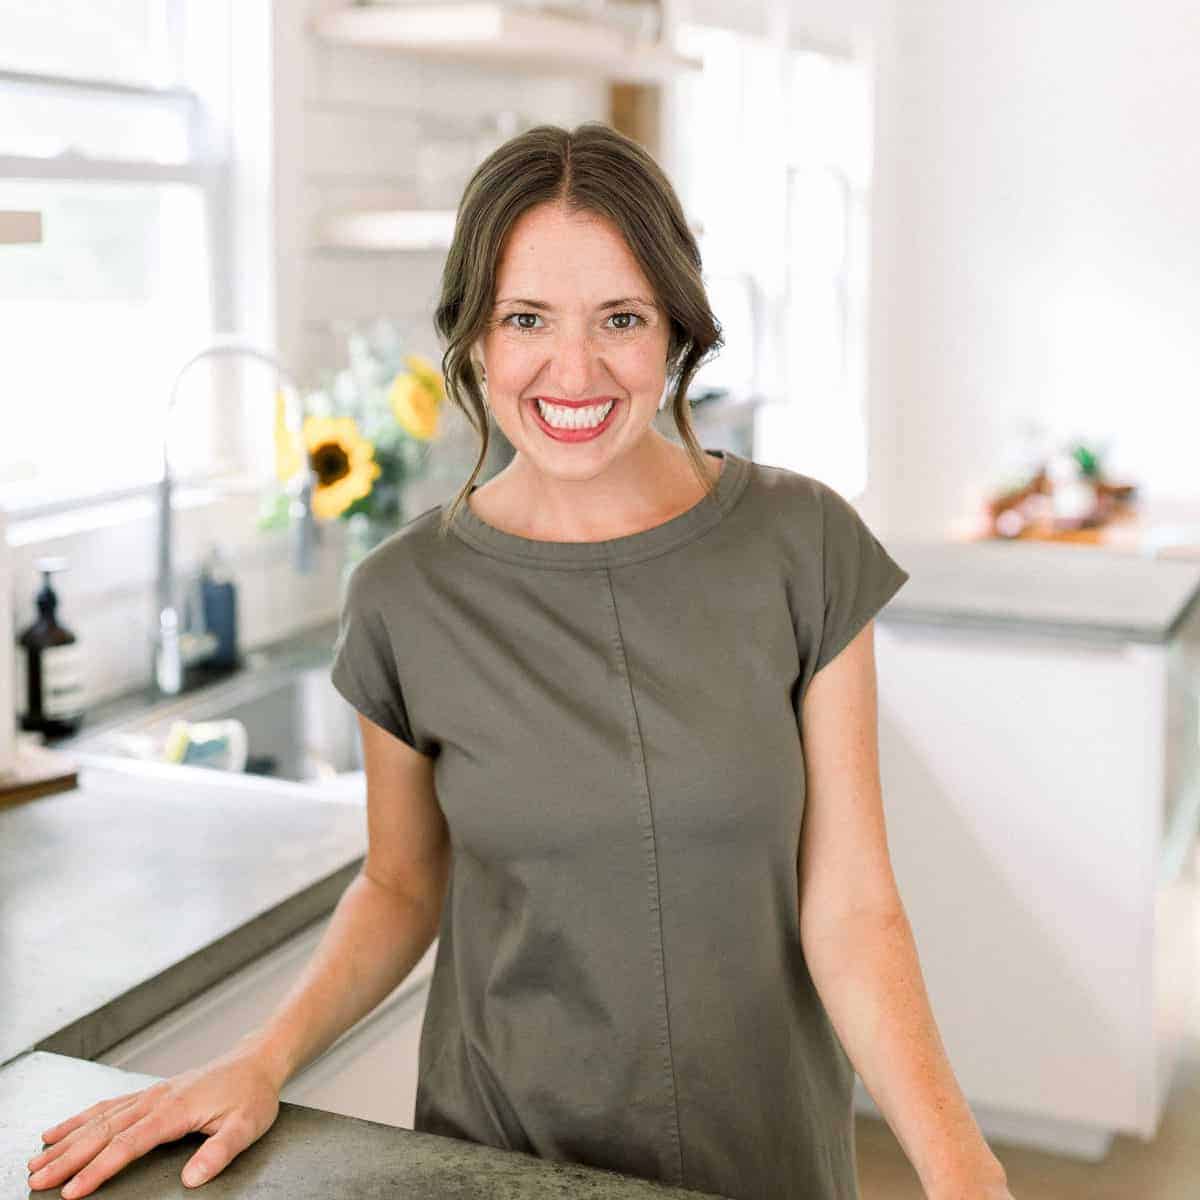 a woman smiling in front of a kitchen counter.